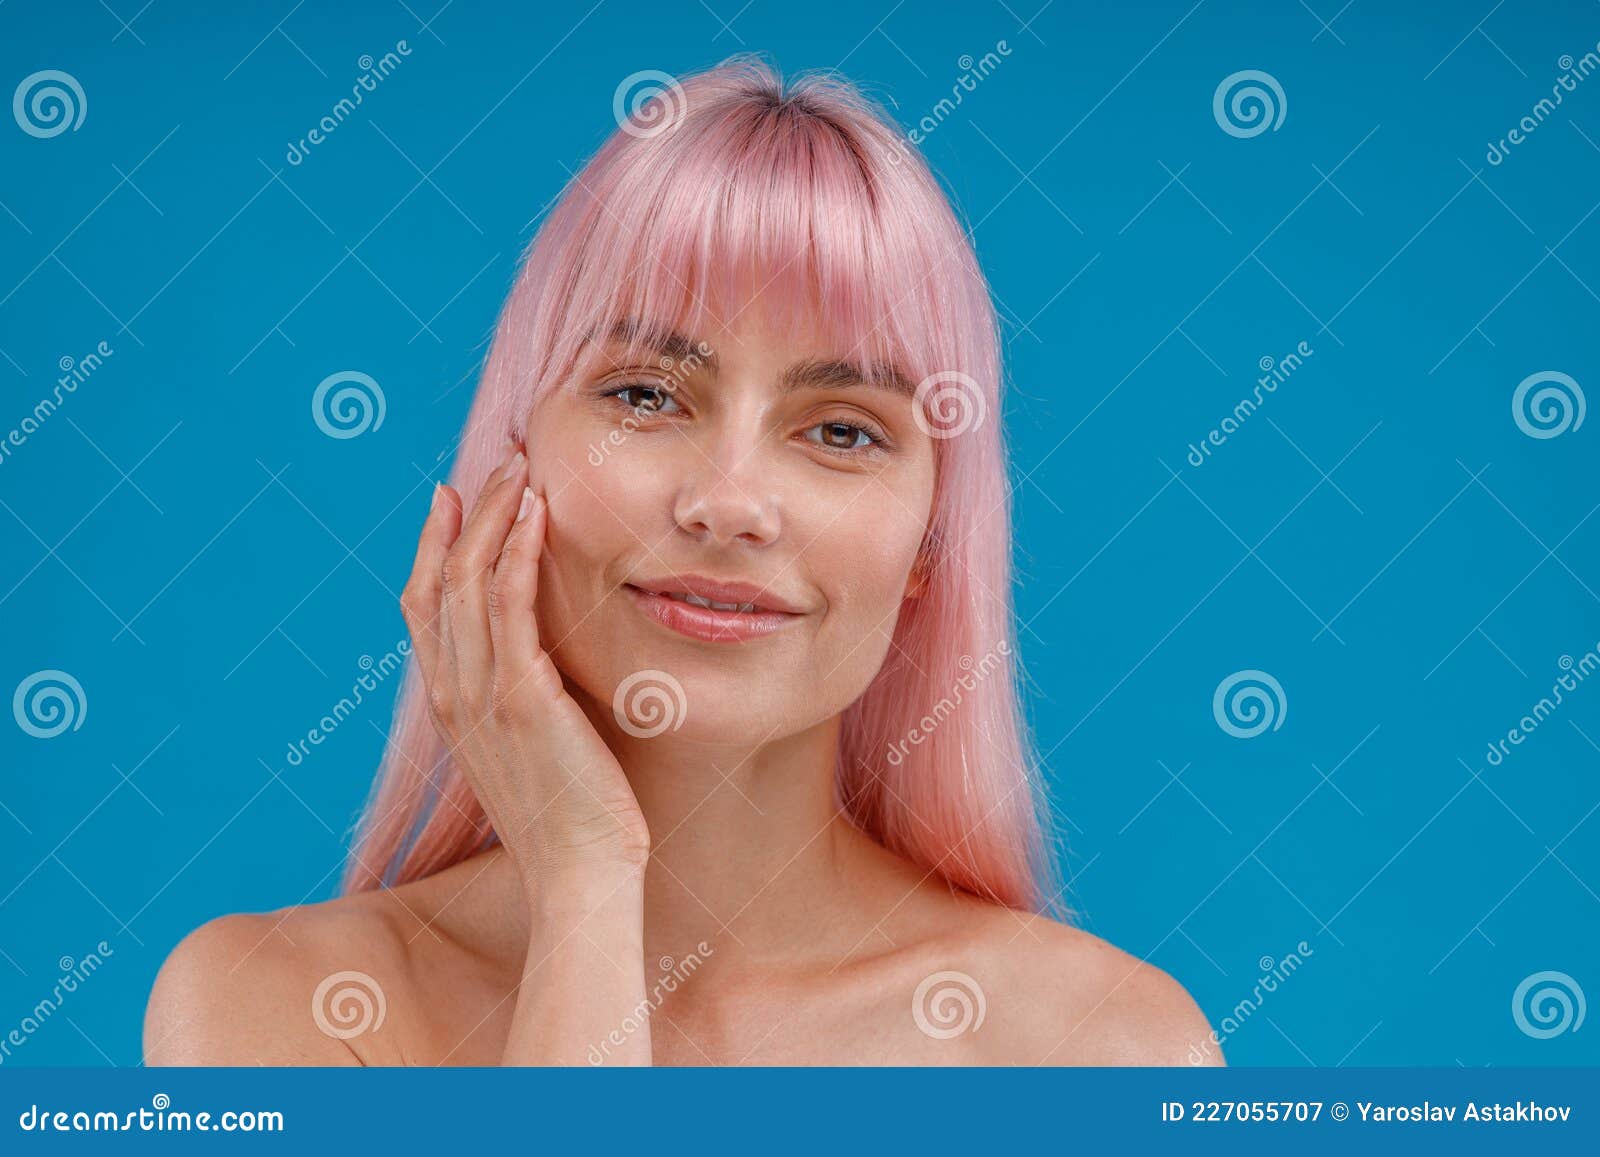 Portrait Of Beautiful Young Woman With Pink Hair And Perfect Skin Looking At Camera Posing 